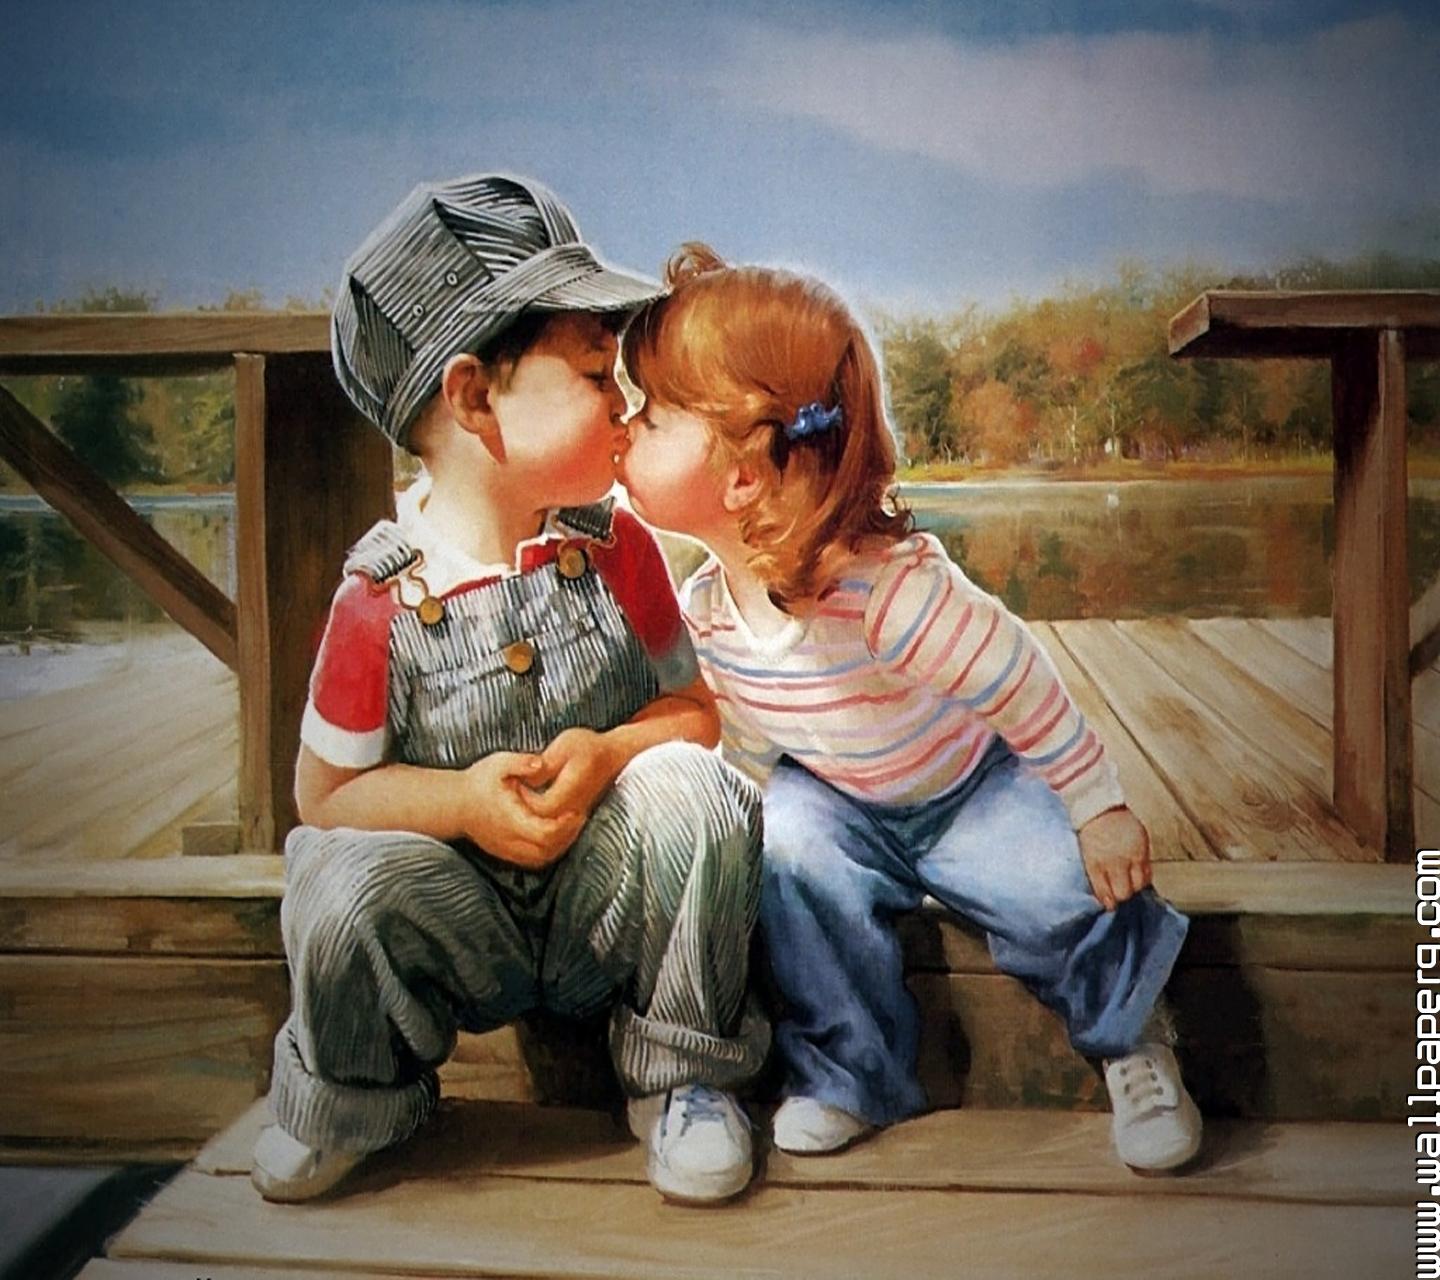 Download Cute kiss 2 - Cute baby profile pics for your ...